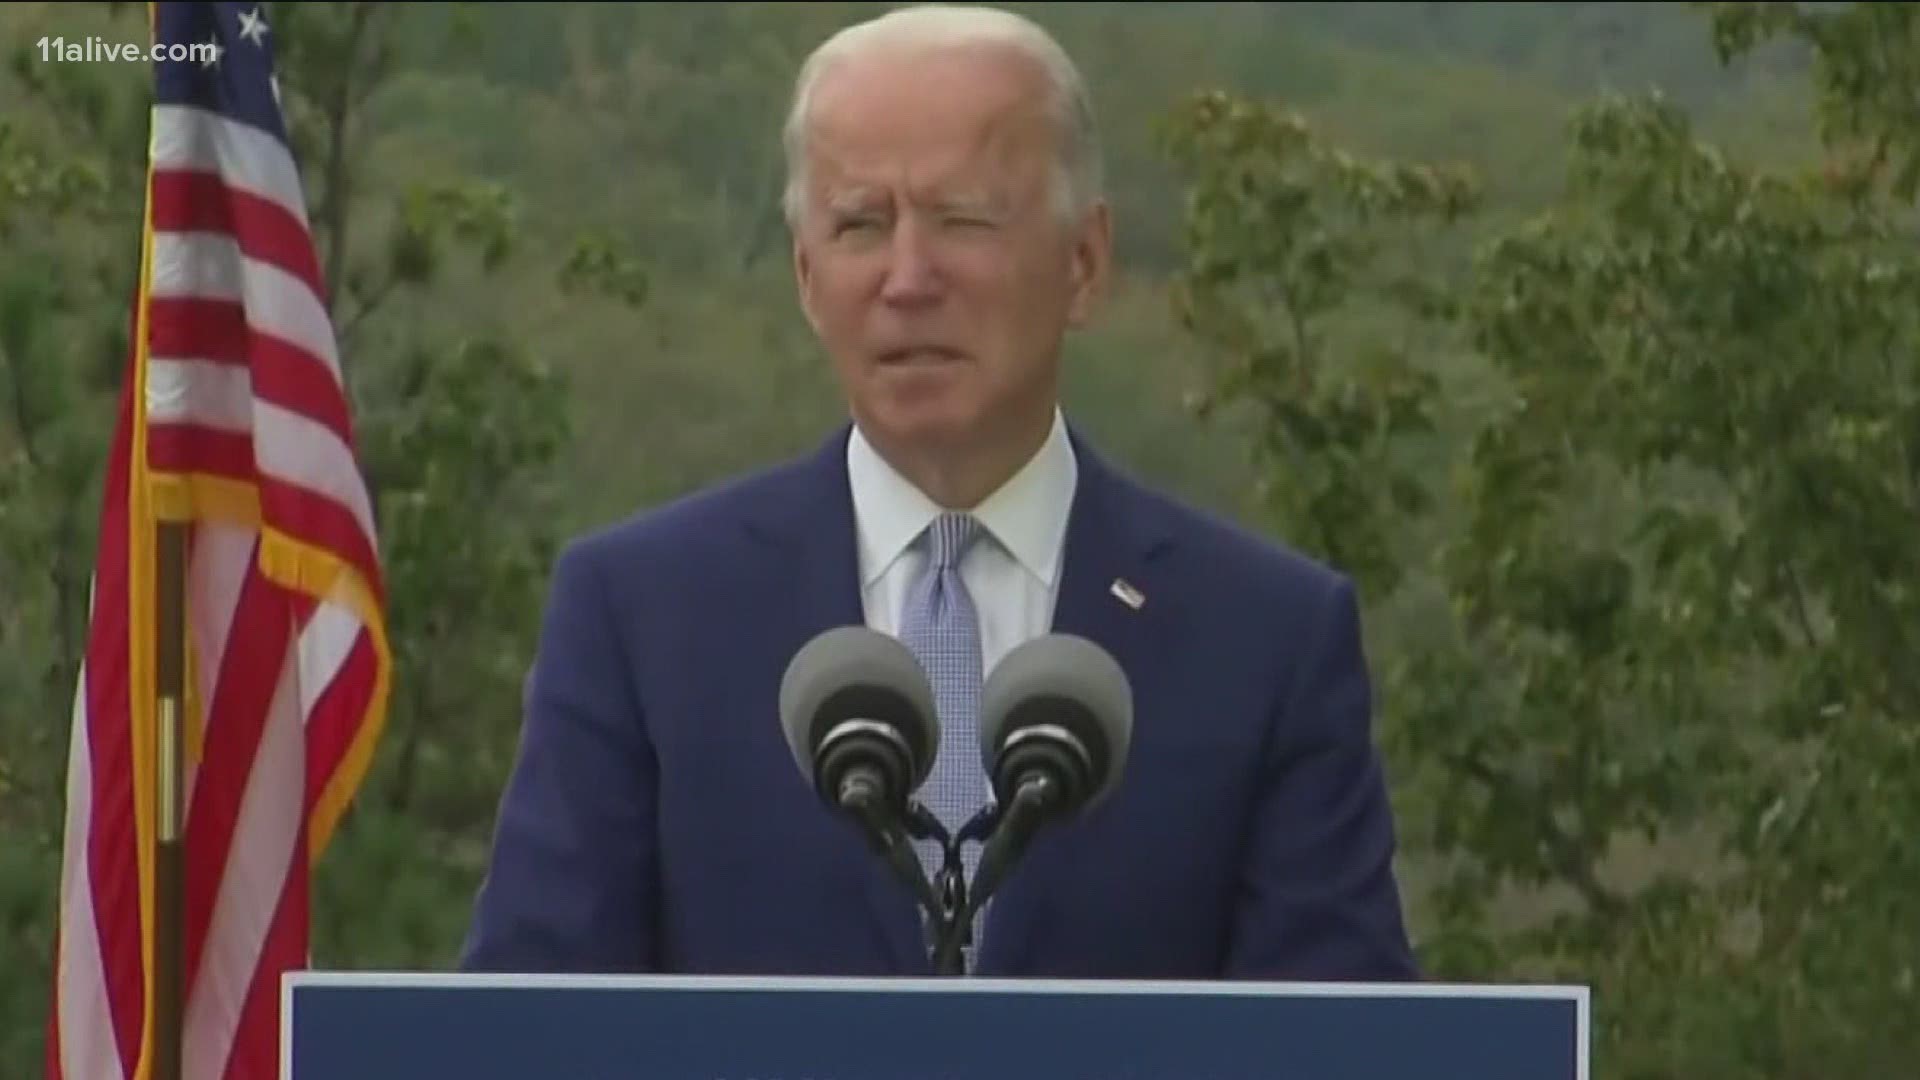 Biden's visit shows that Democrats think they can take Georgia for the first time since 1992.